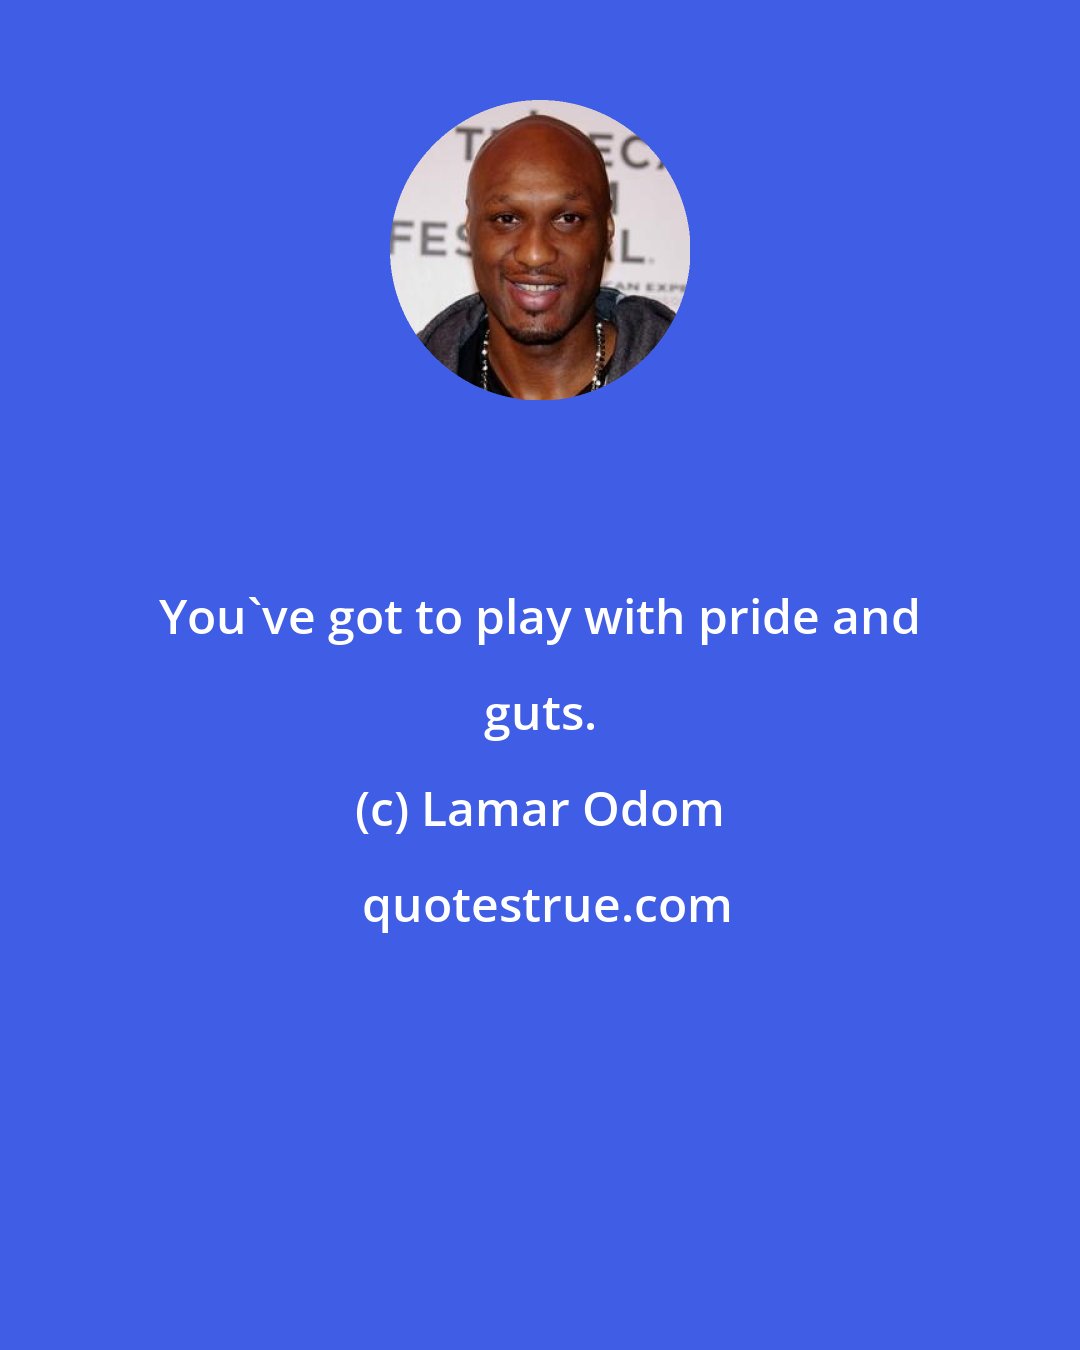 Lamar Odom: You've got to play with pride and guts.